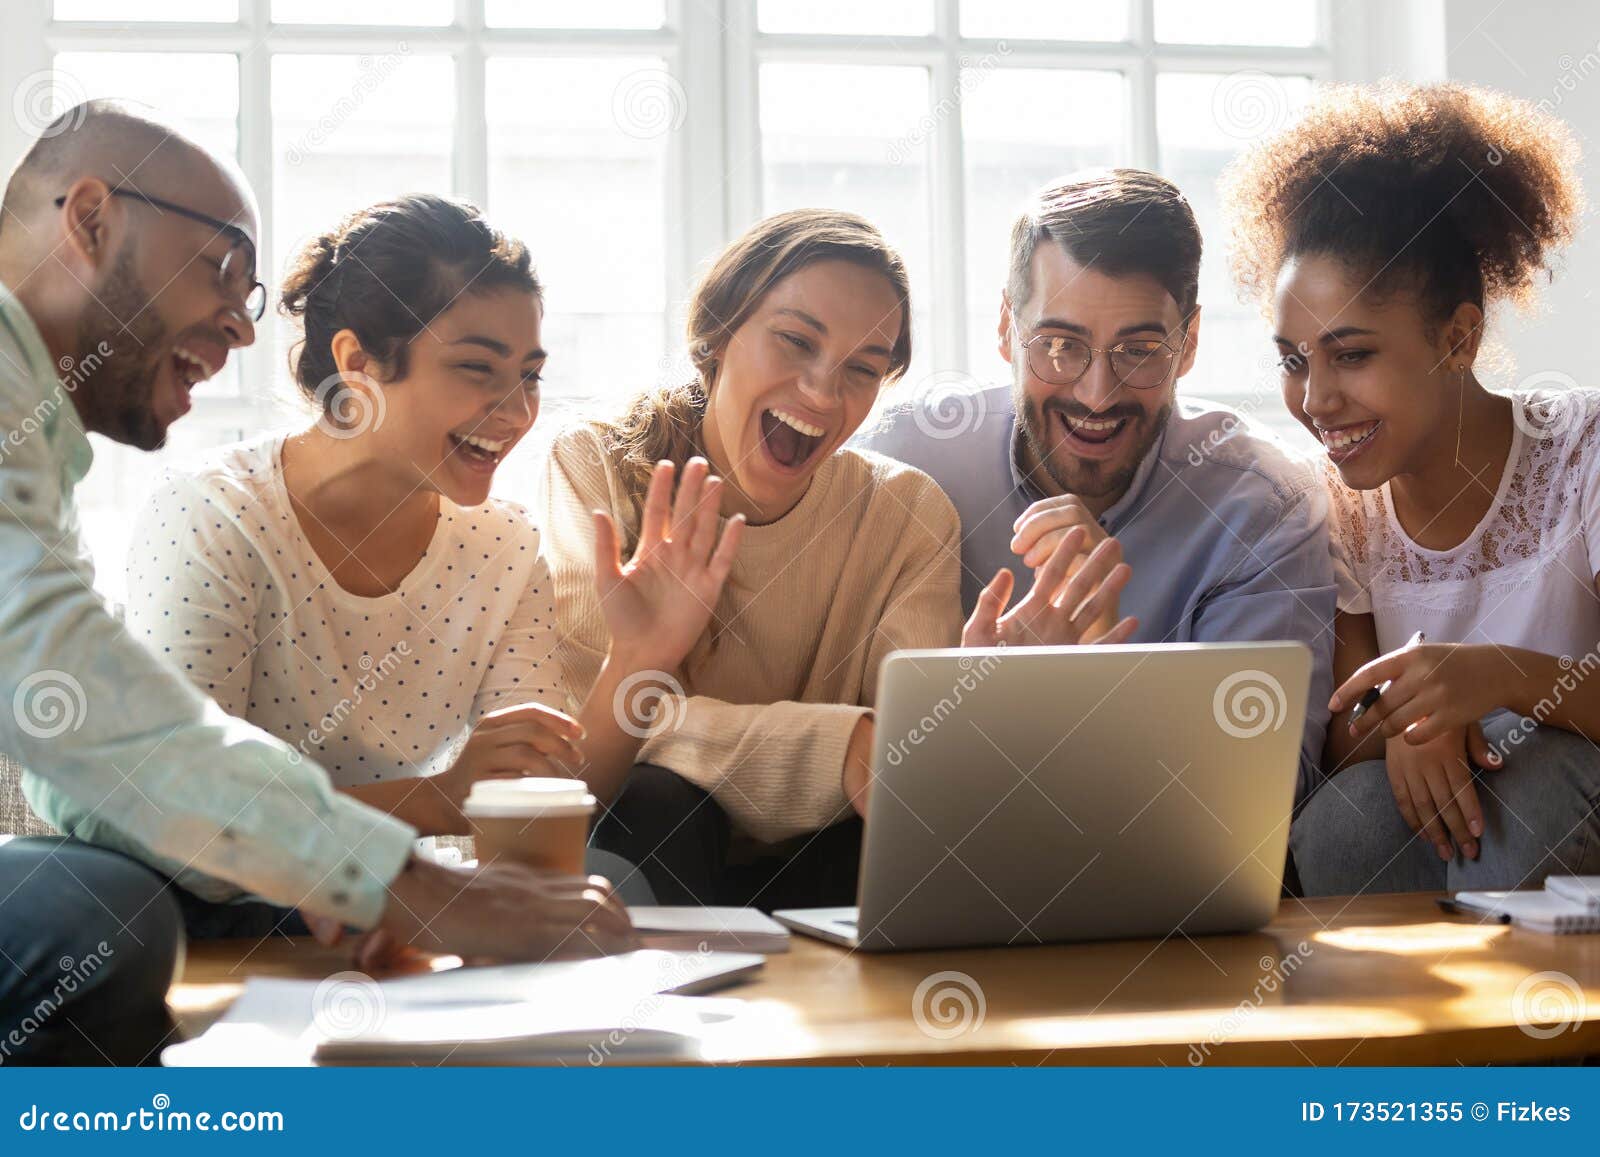 five multi-ethnic friends make videocall looking at laptop screen